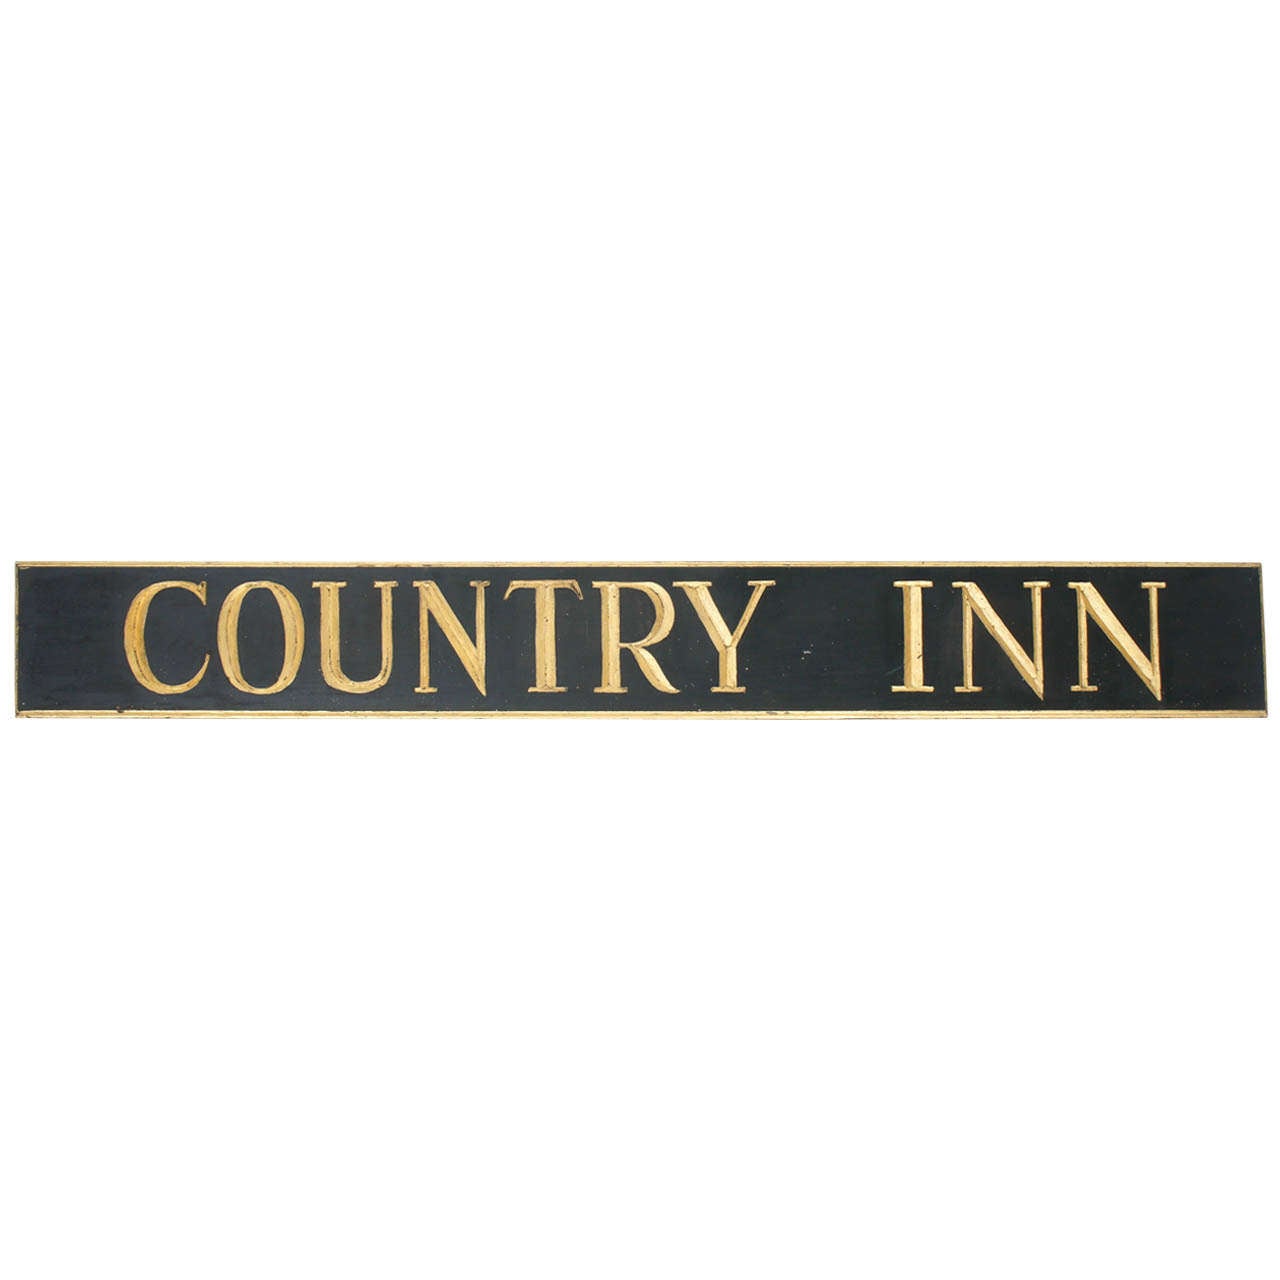 Two Sided "Country Inn" Sign For Sale